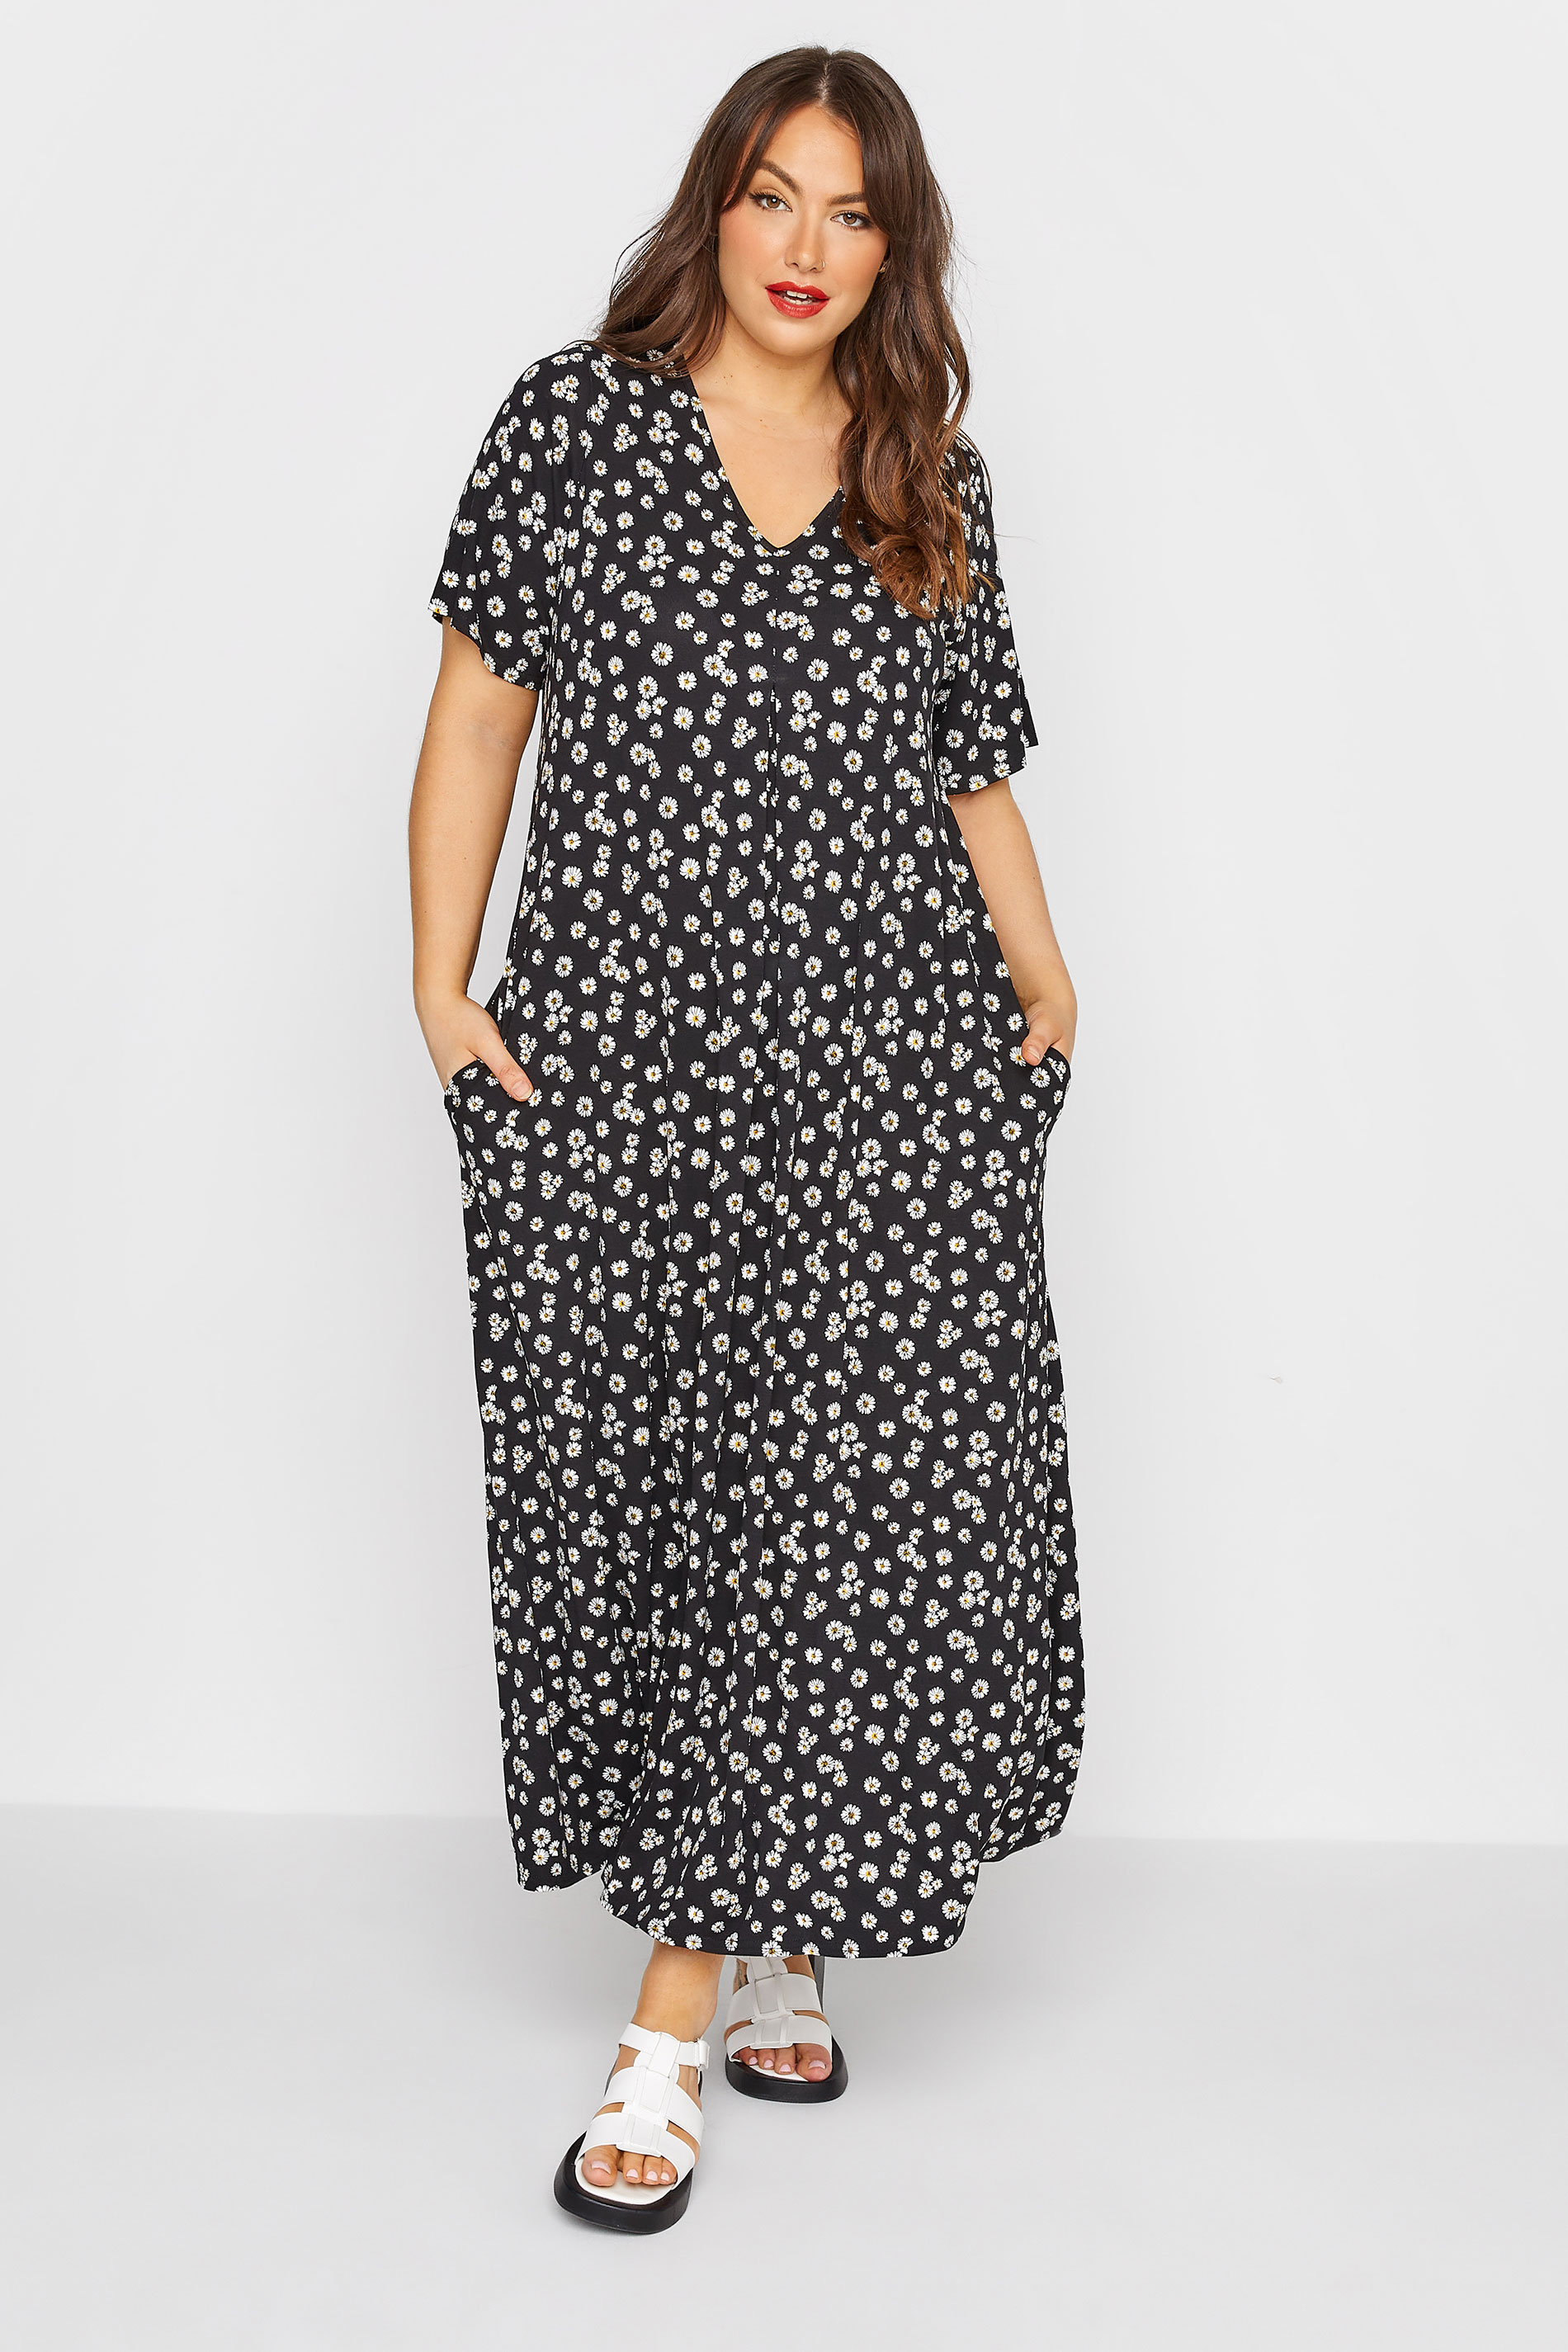 LIMITED COLLECTION Curve Black Daisy Pleat Front Maxi Dress_A.jpg